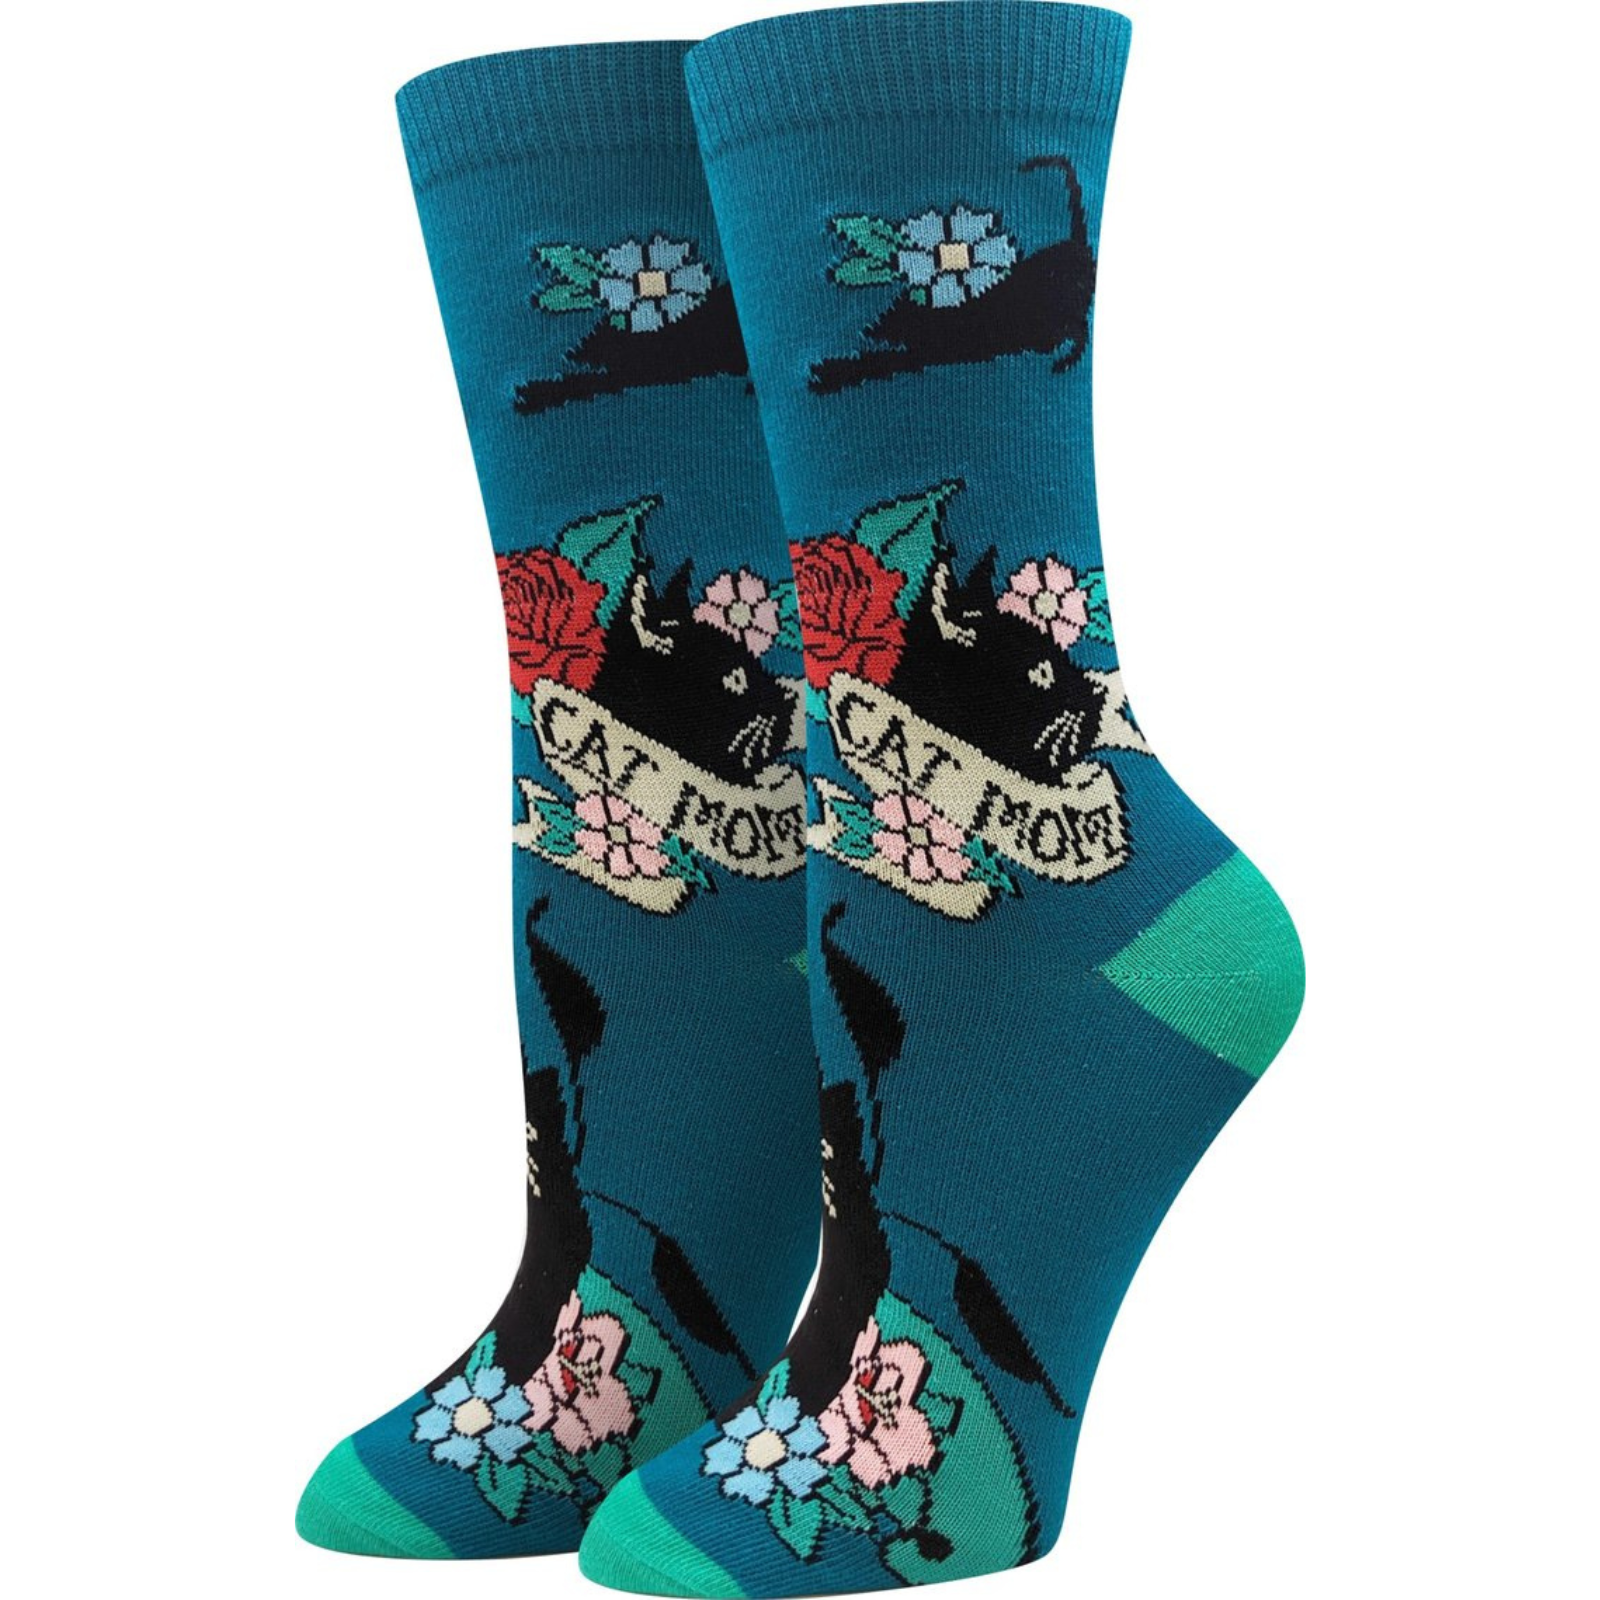 Sock Harbor Cat Mom women's crew sock in teal featuring black cat playing in flowers and "Cat Mom" 